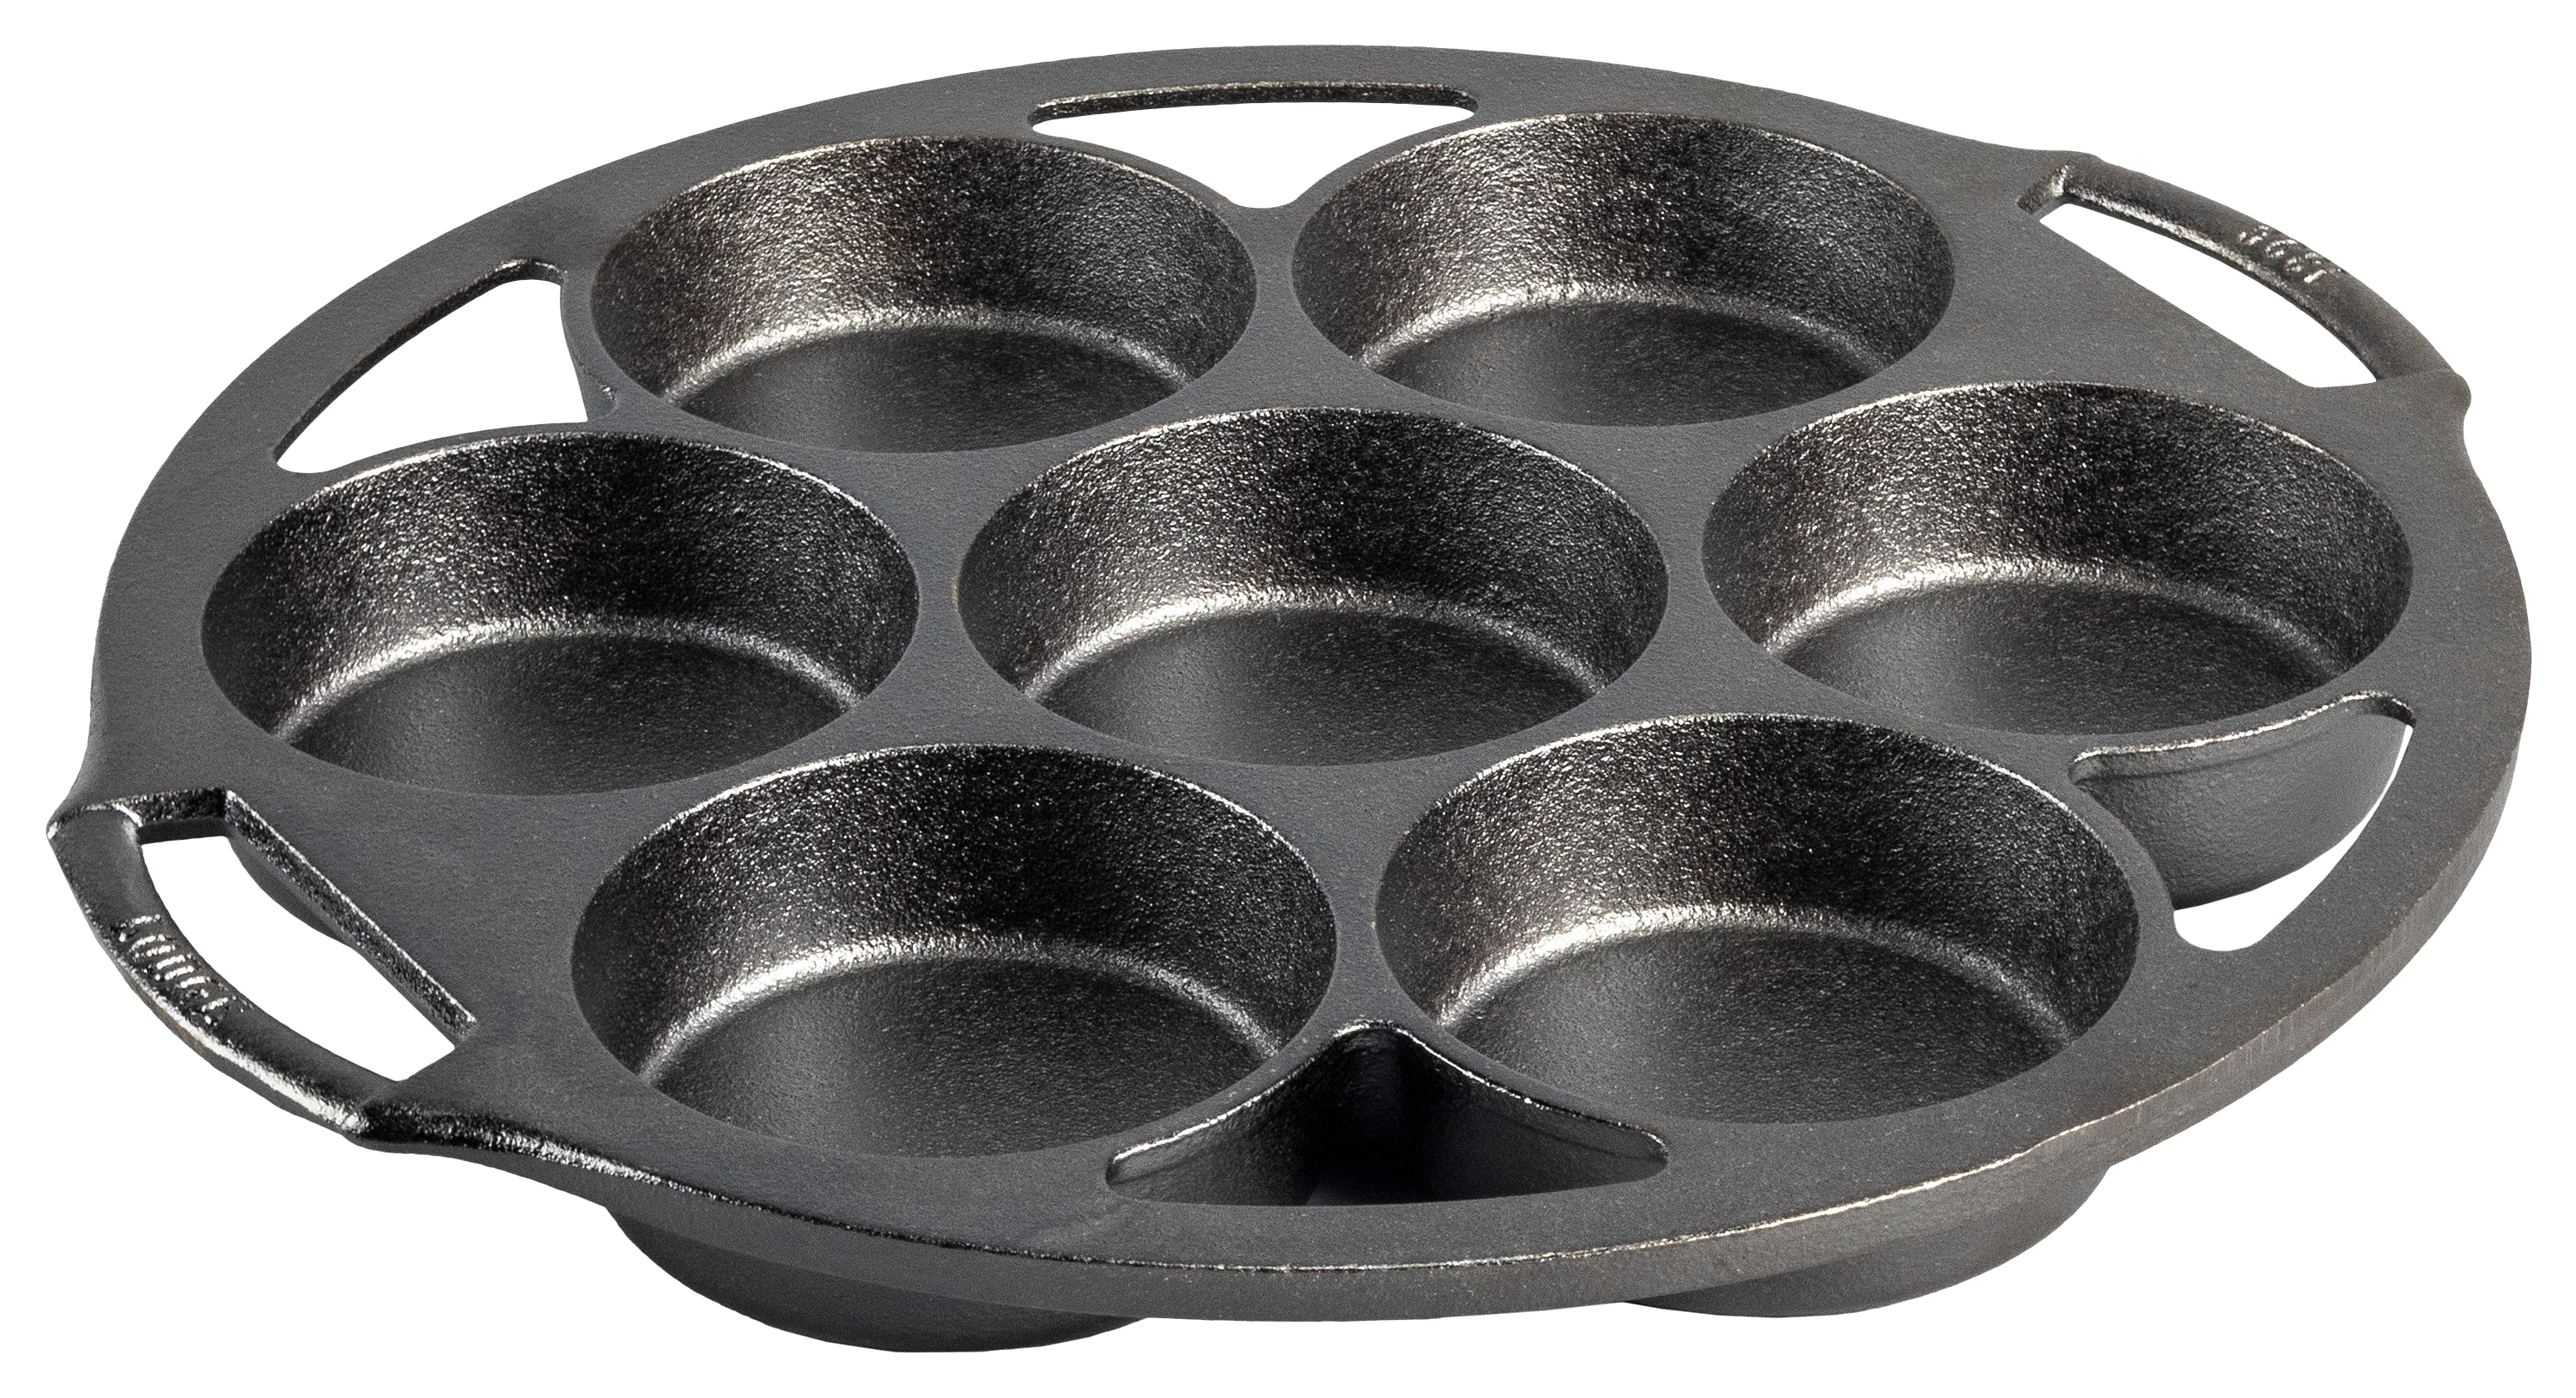 Lodge Muffin Pan, Seasoned Cast Iron, L5P3, with 6 impressions 